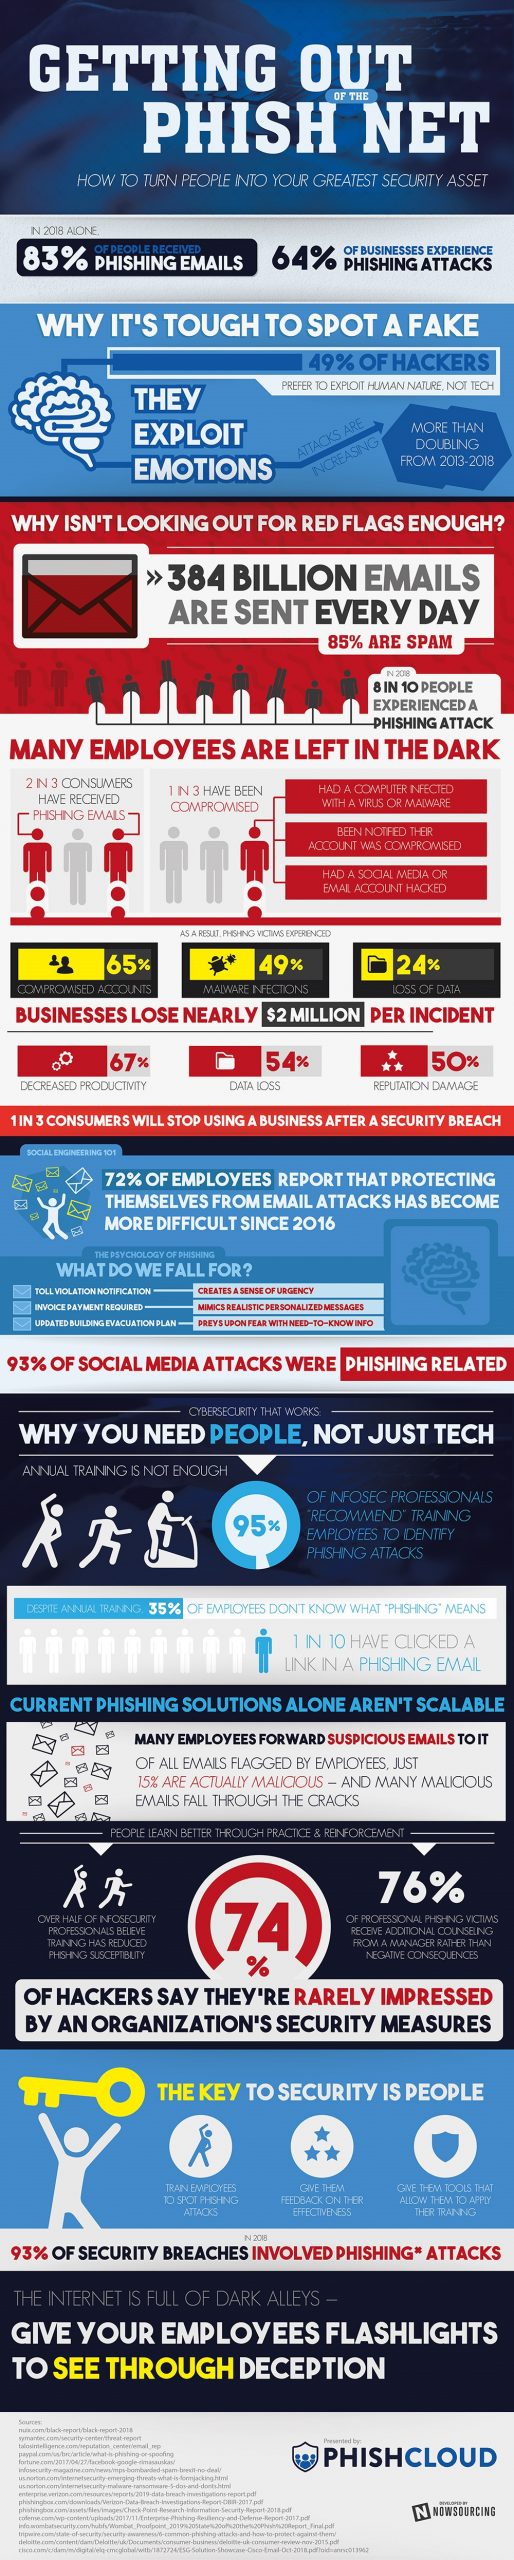 Getting Out of the Phishing Net [Infographic]